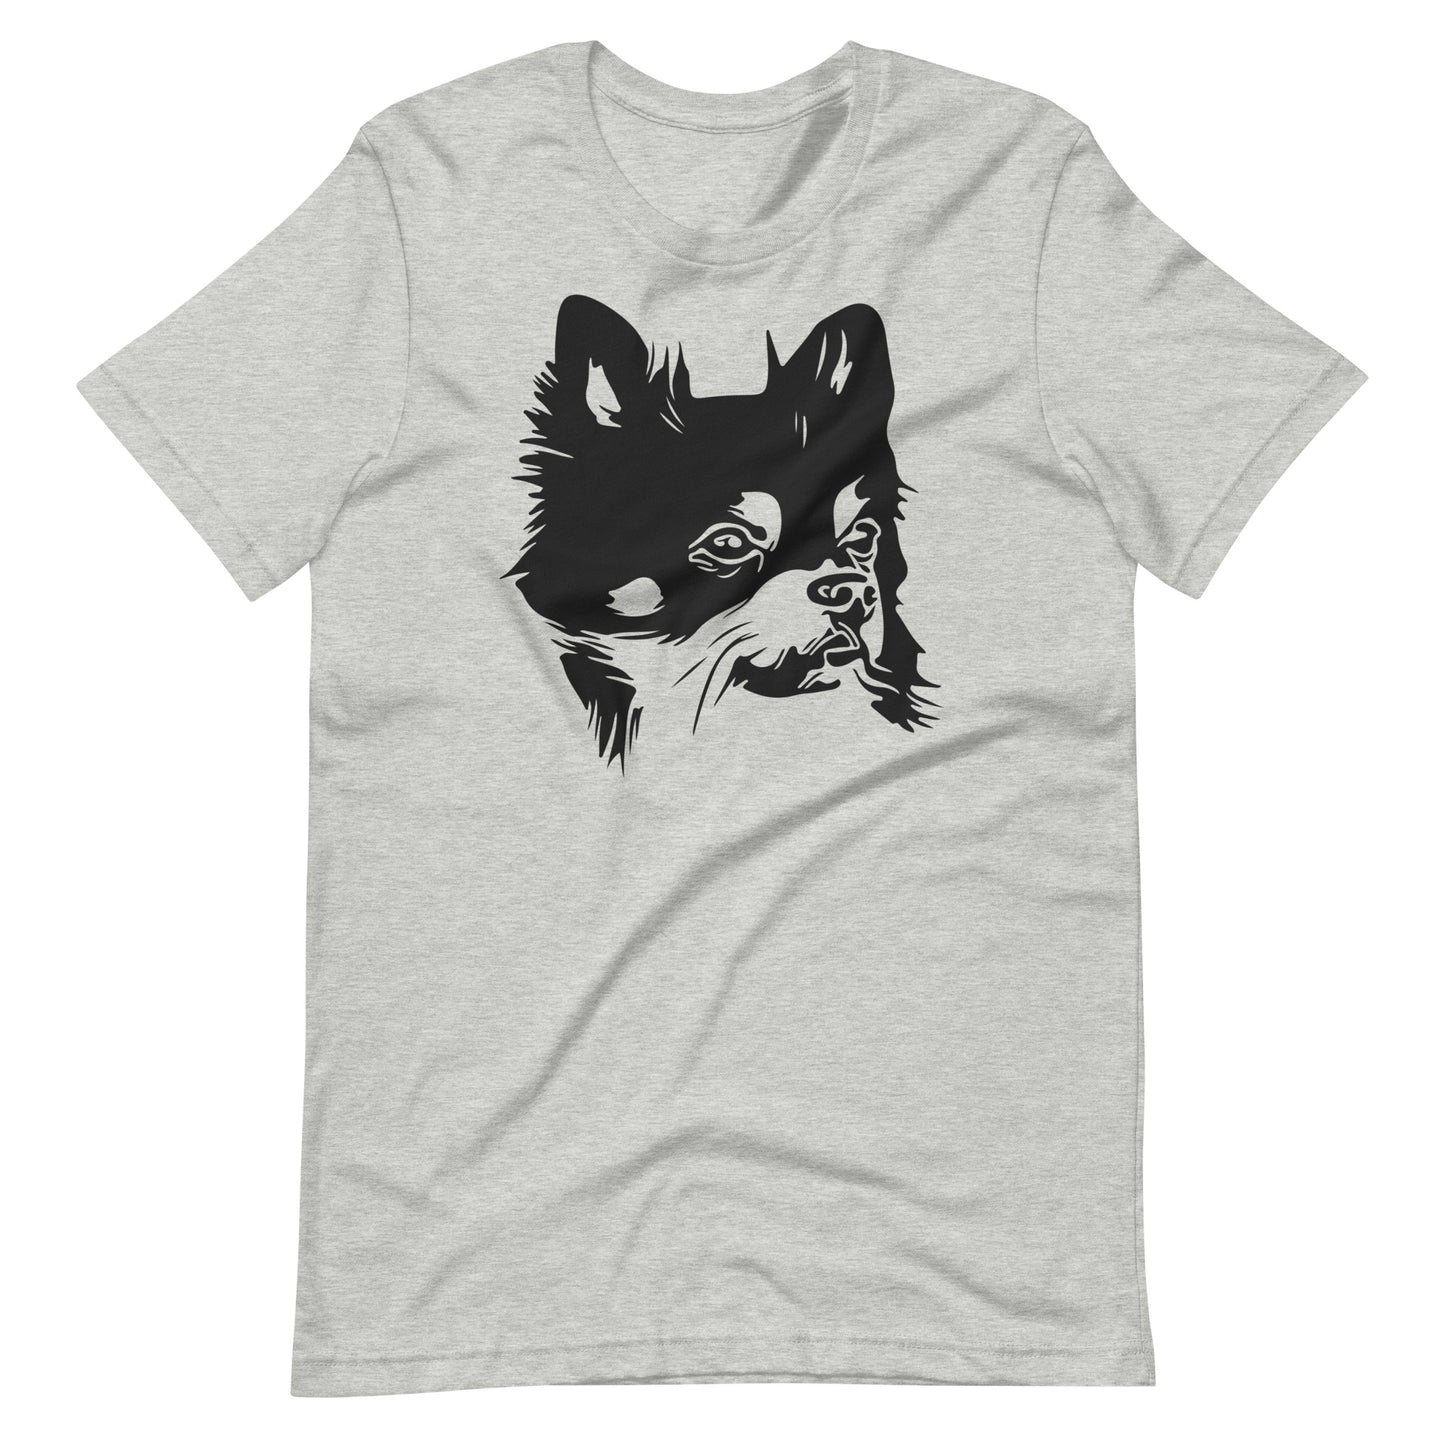 Black Chihuahua face silhouette looks sideways on unisex athletic heather t-shirt